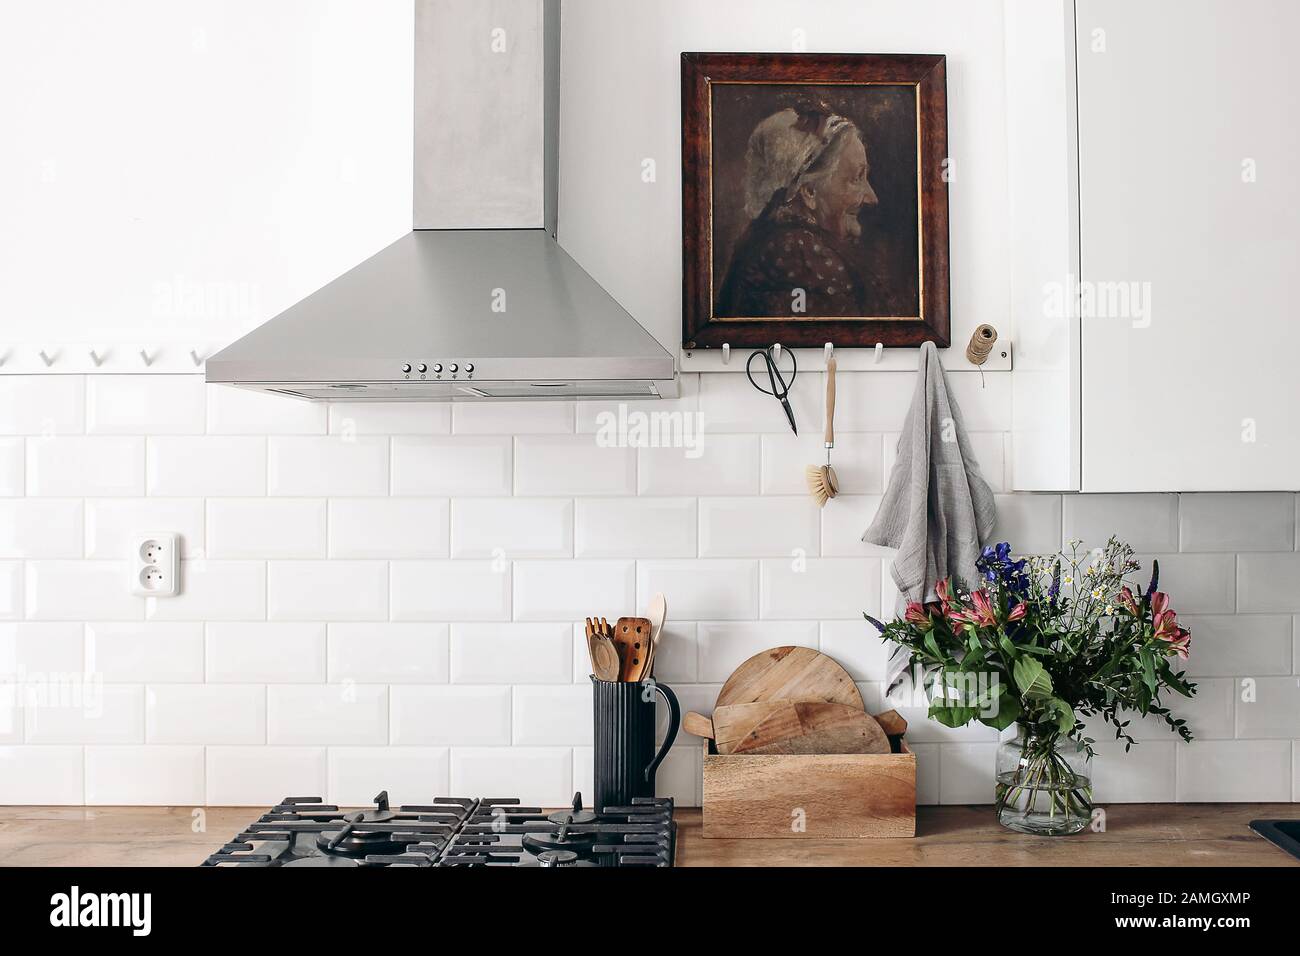 Modern eclectic kitchen interior. White brick wall with metro tiles, peg rails and oil painting. Wooden countertop, stainless steel hood and gas stove Stock Photo